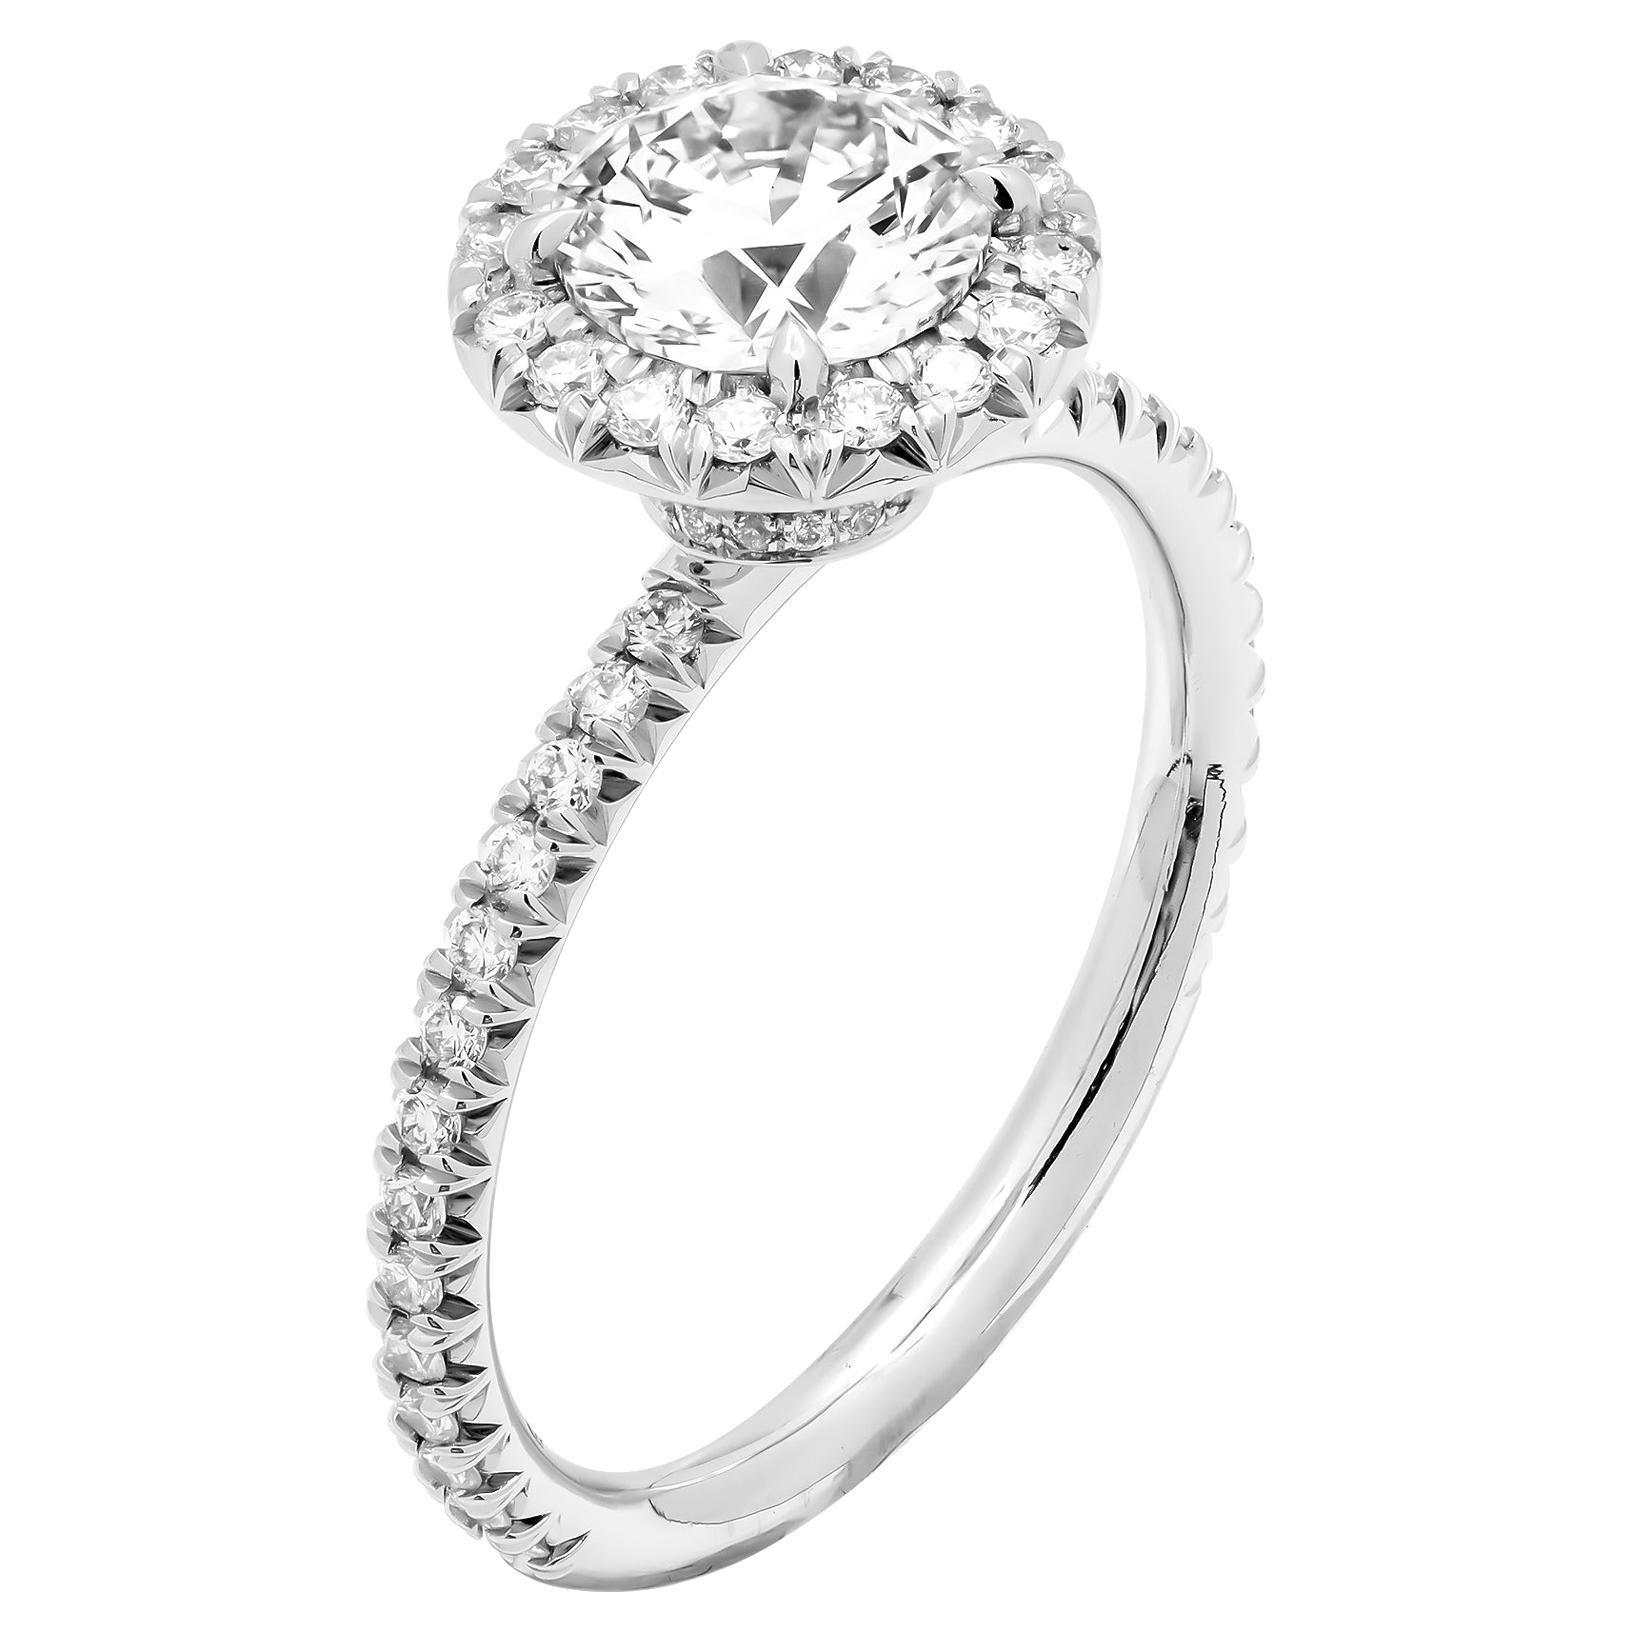 GIA Certified 1.02 Carat H VS2 Round Cut Diamond Engagement Ring For Sale